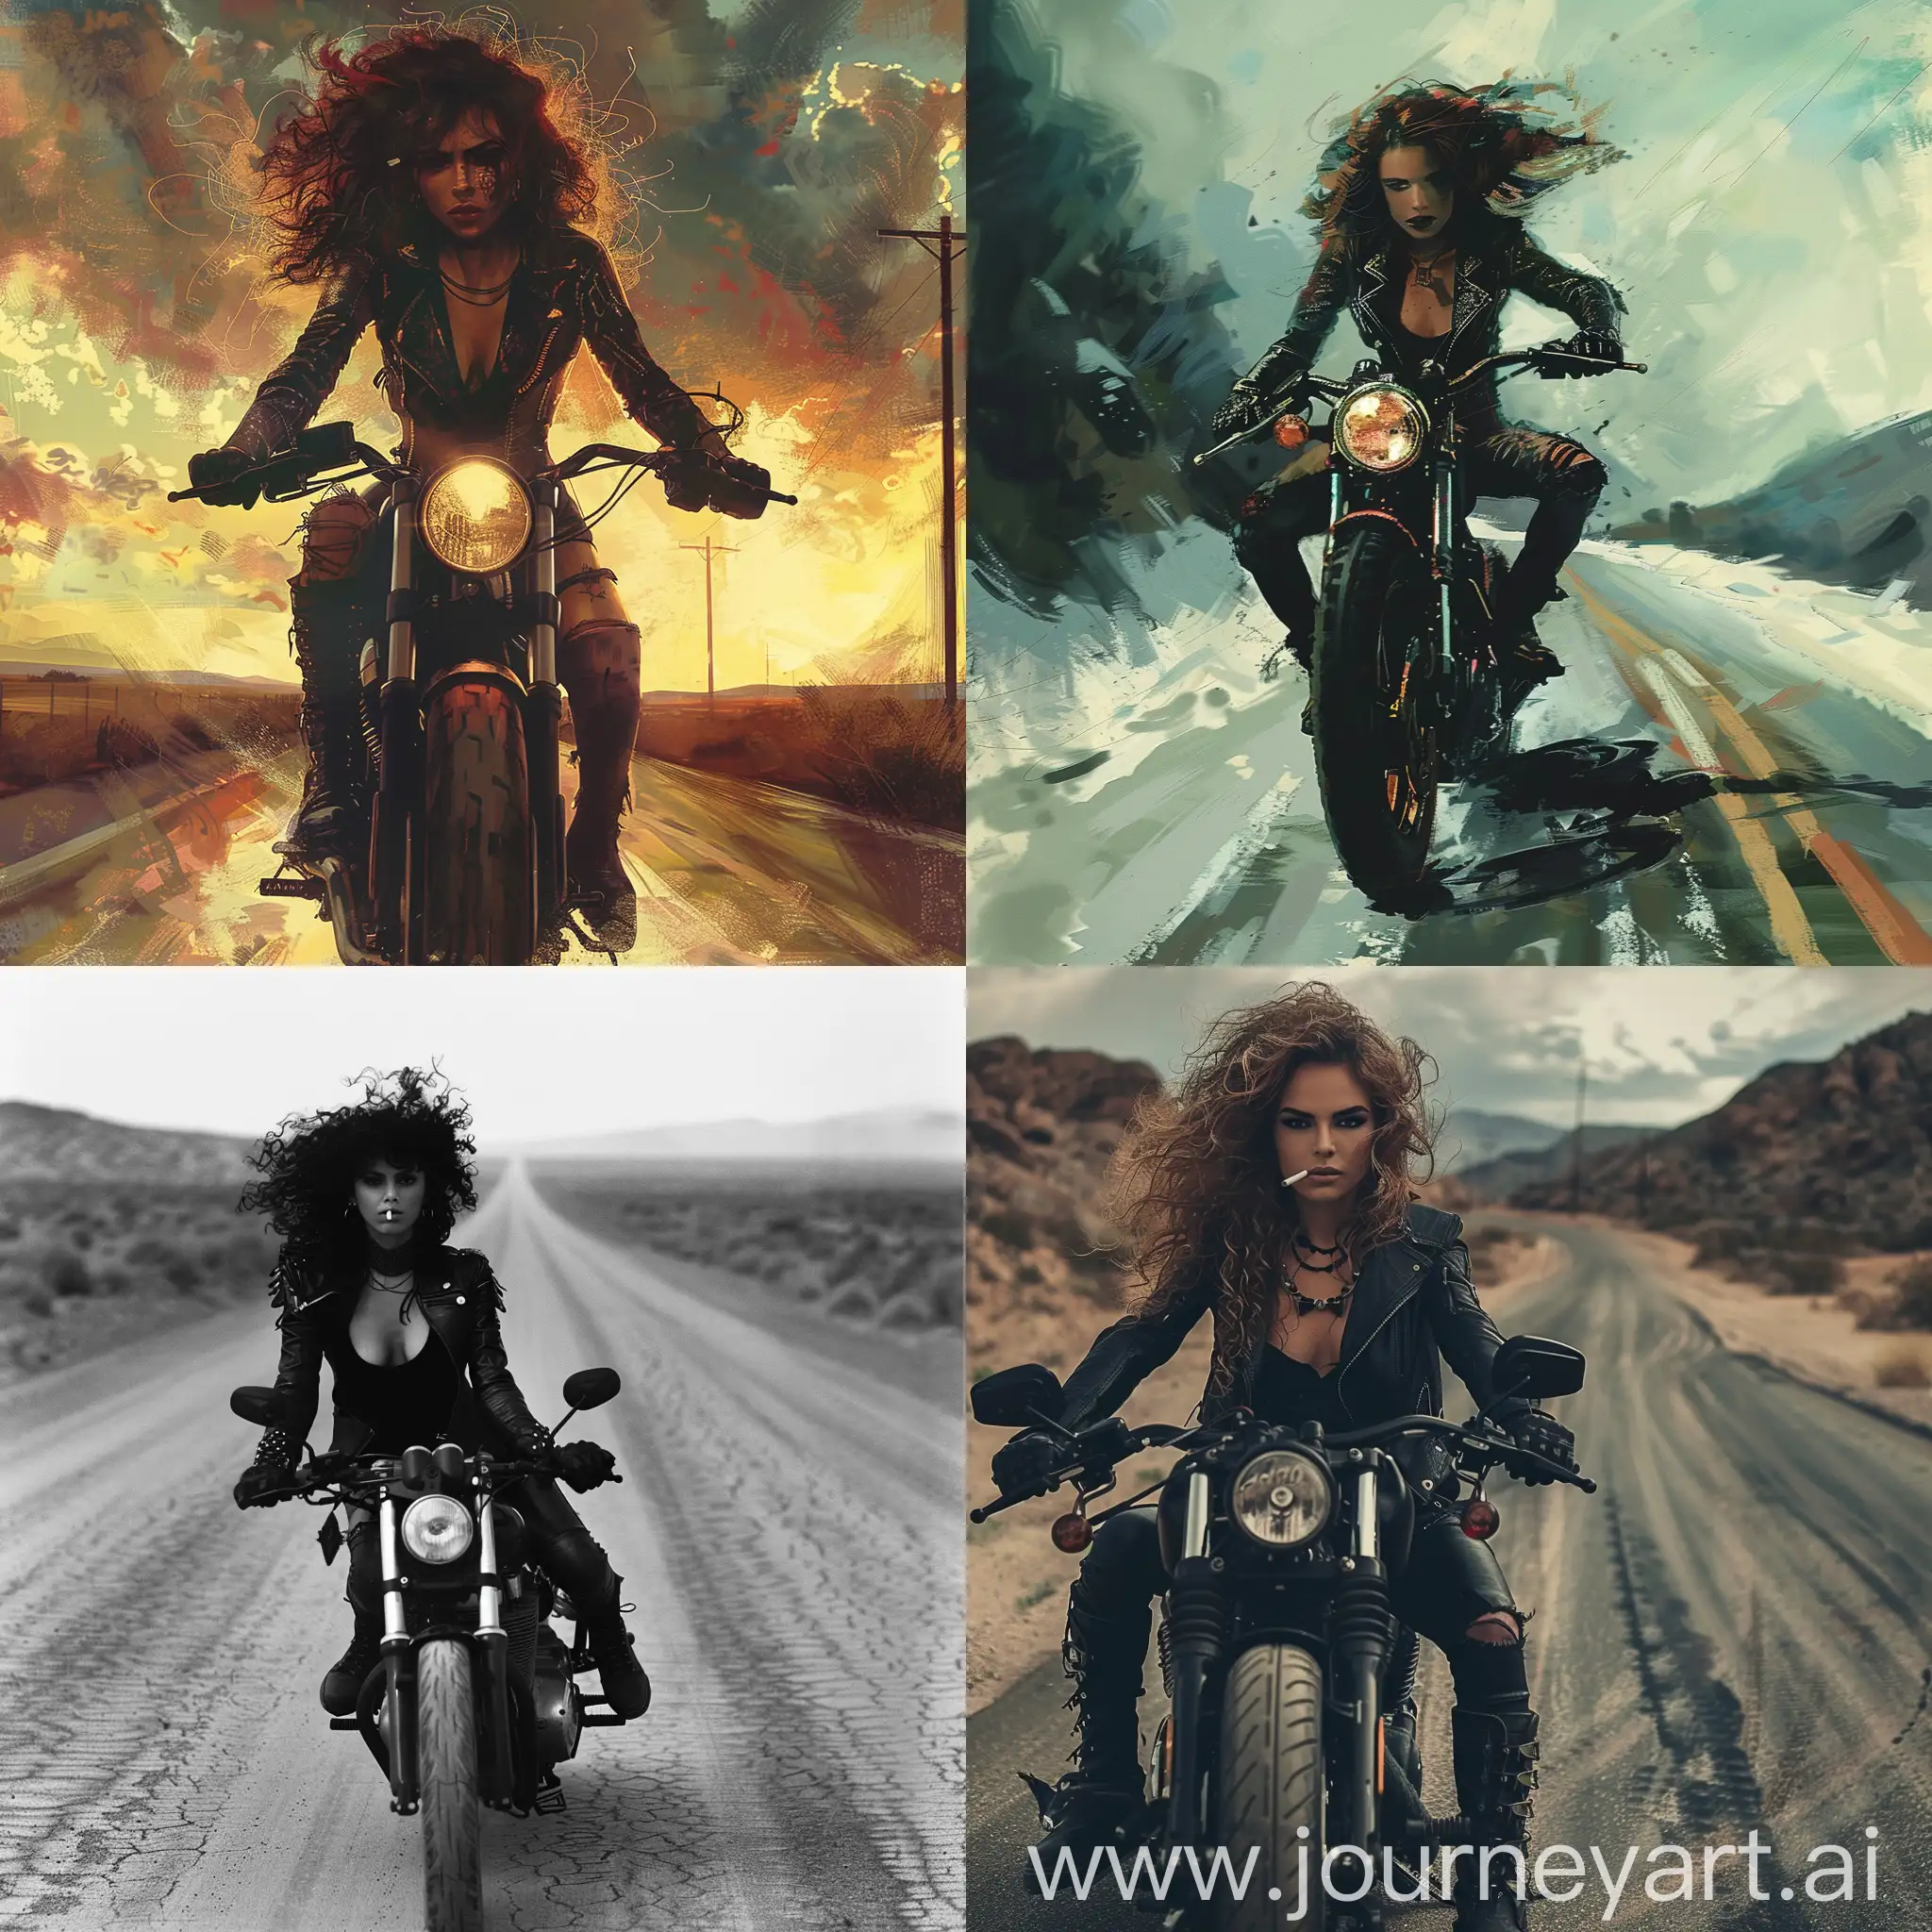 Motorcyclist-Riding-Down-Deserted-Road-in-Stylish-Black-Outfit